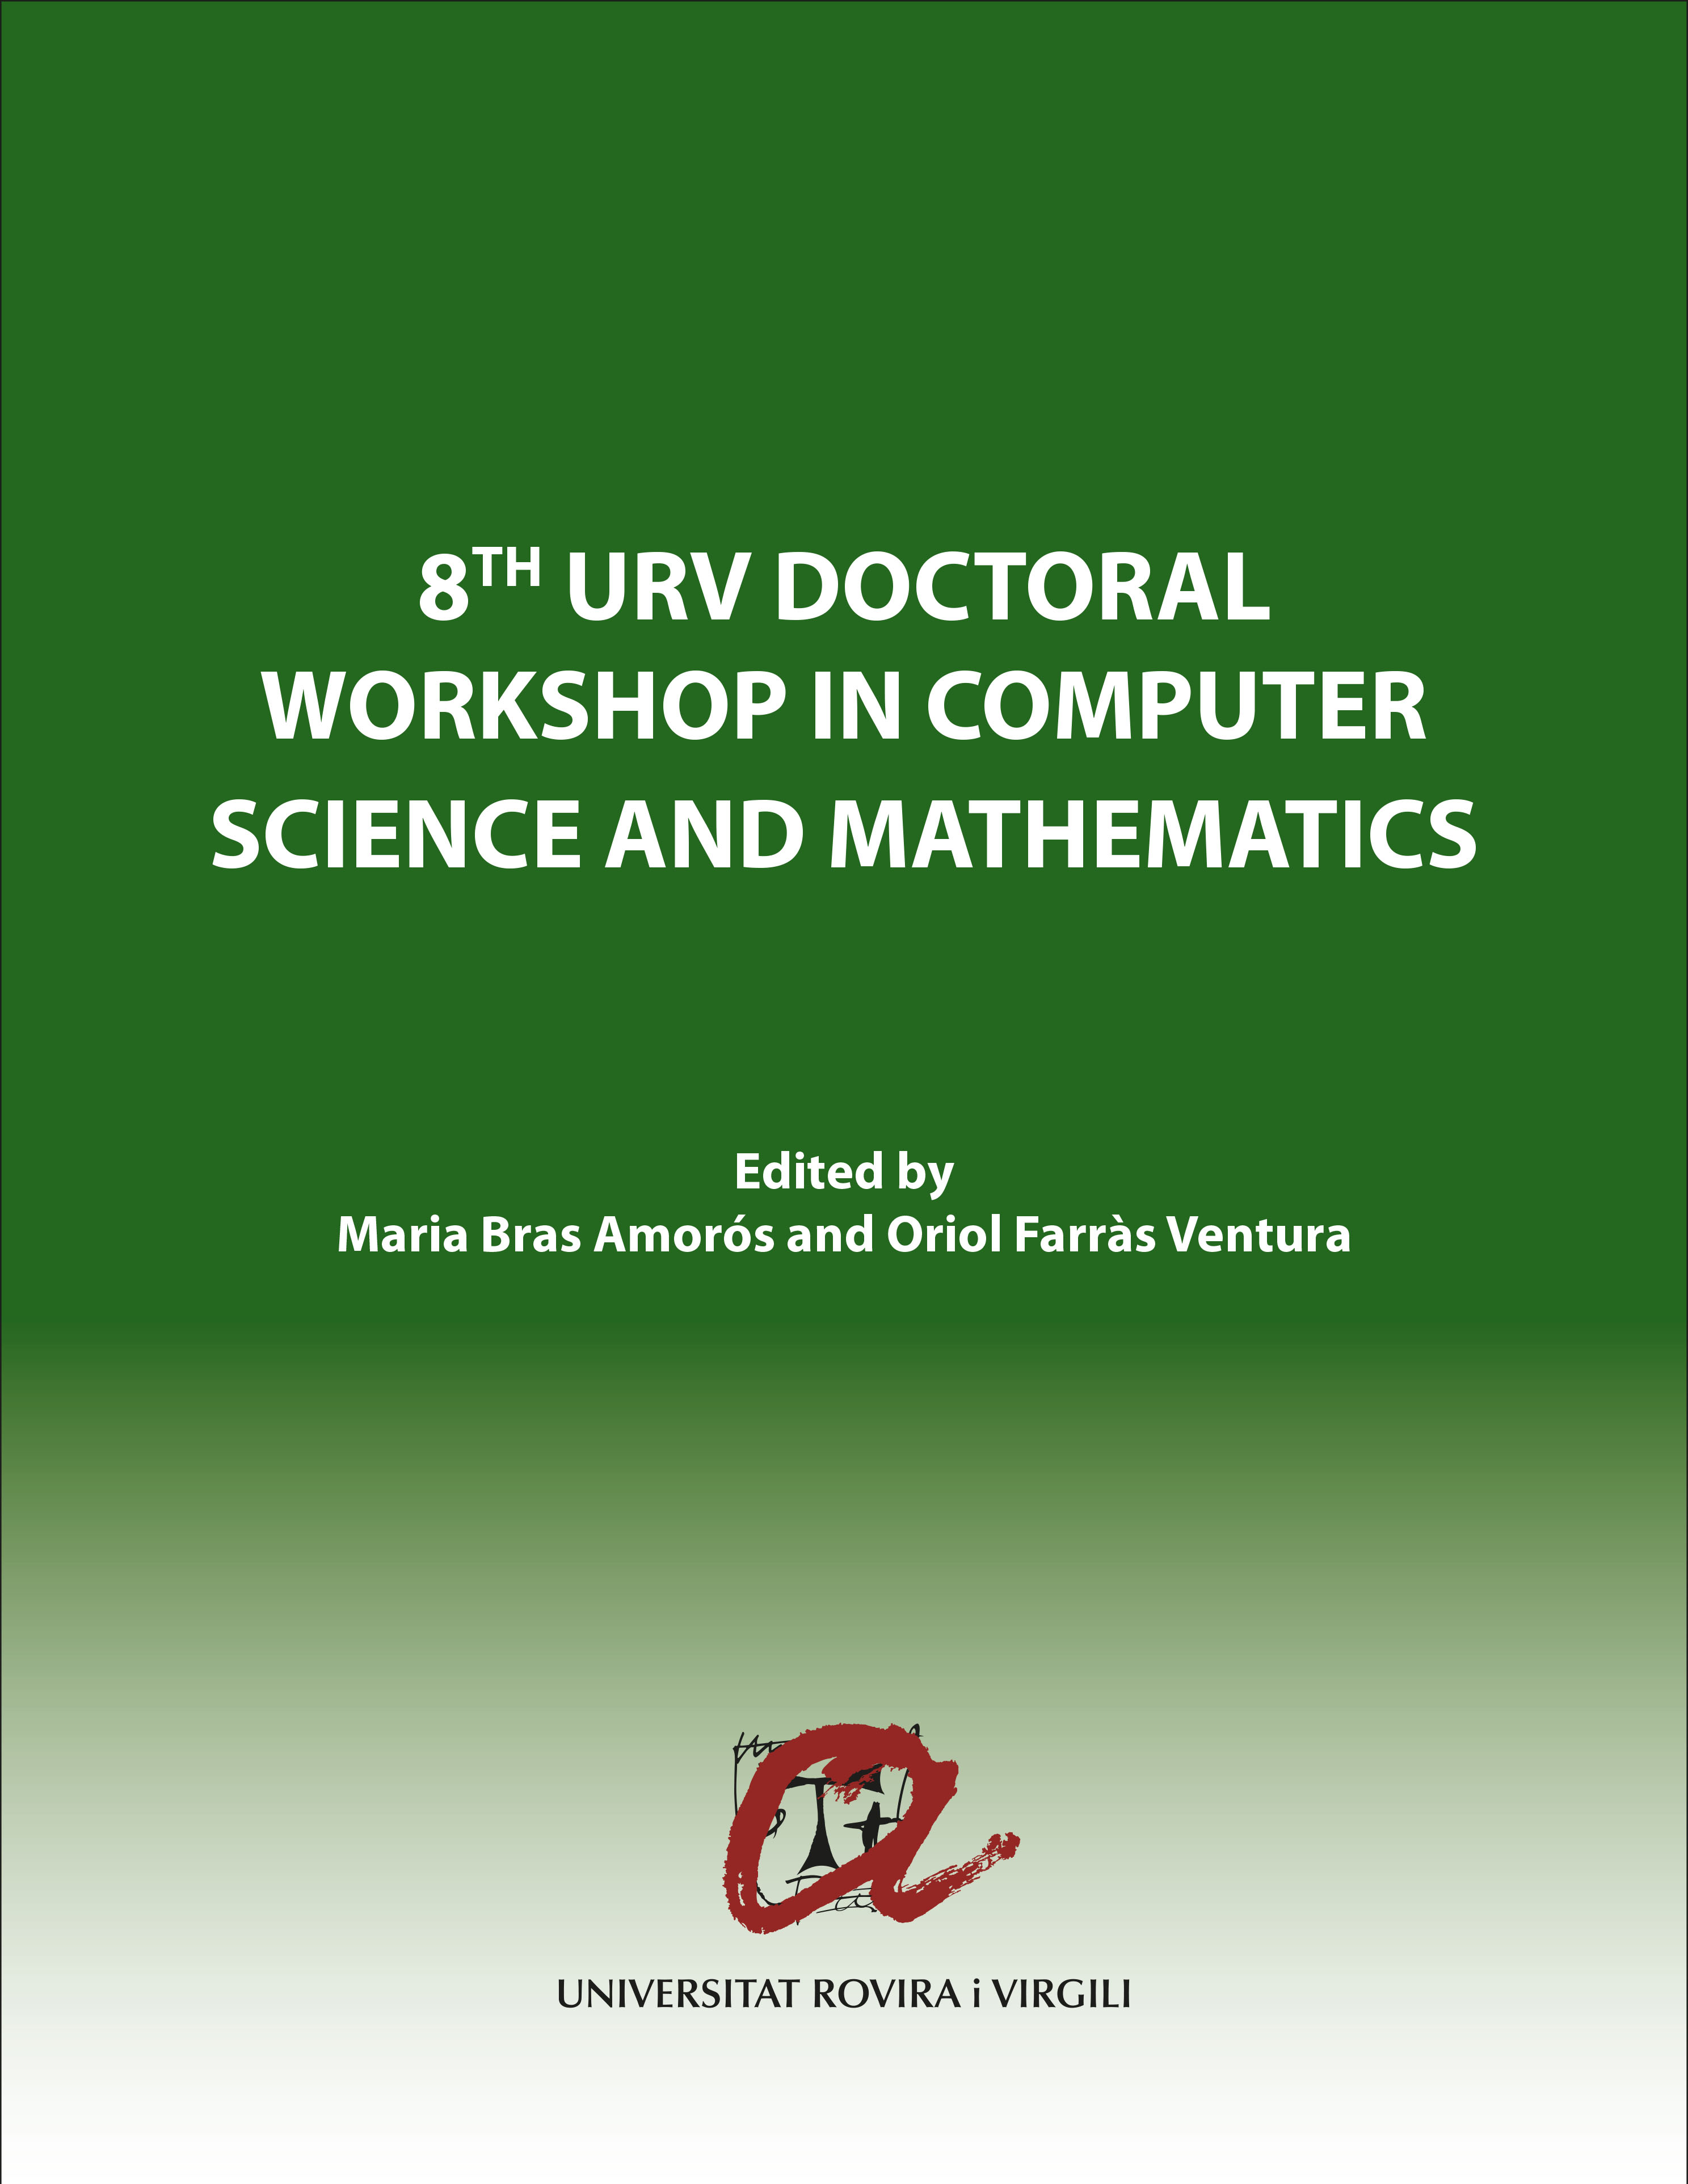 8th URV Doctoral Workshop in Computer Science and Mathematics